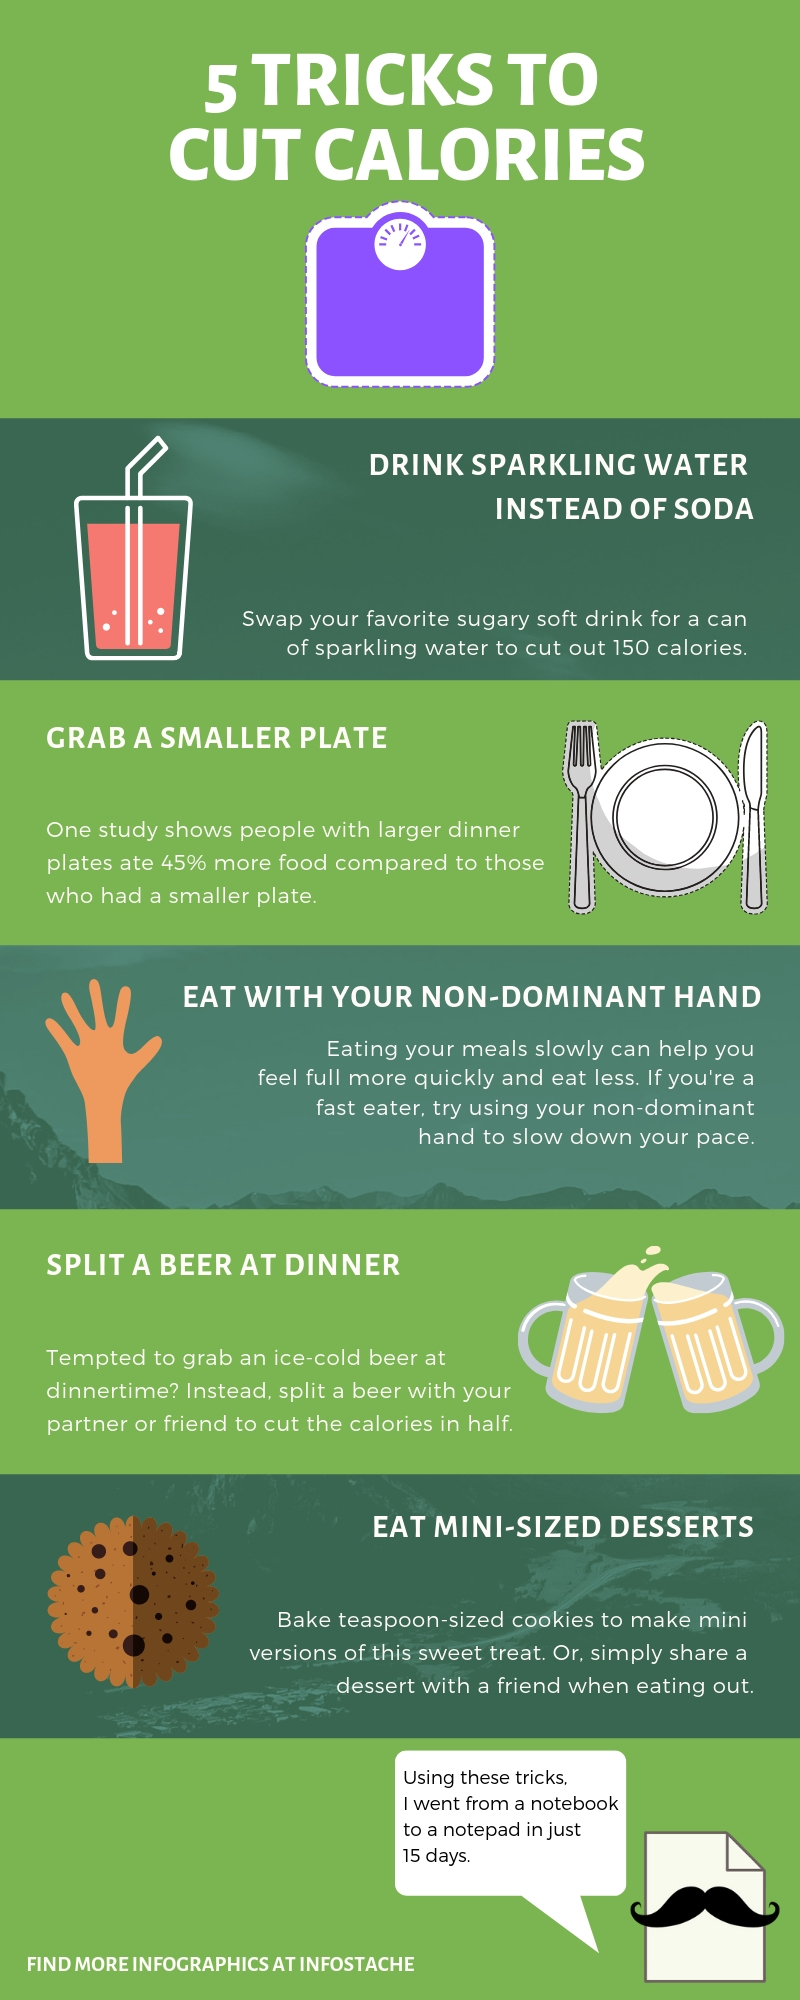 5 Tricks to Cut Calories - Infographic